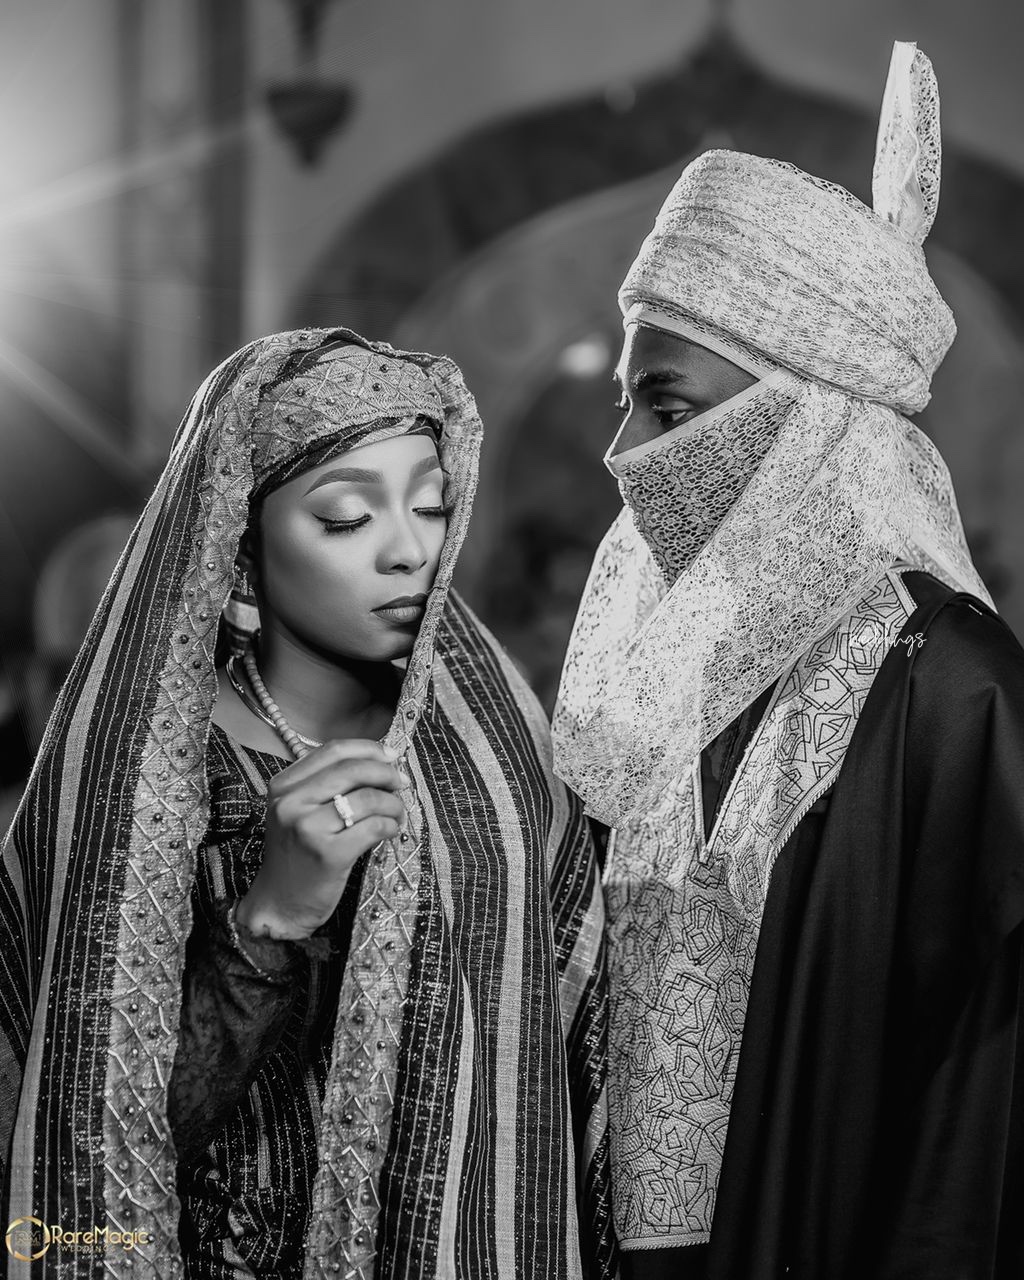 Check out this alluring pre wedding photo shoot of Faozyat & Abduluawiy from Northern Nigeria 